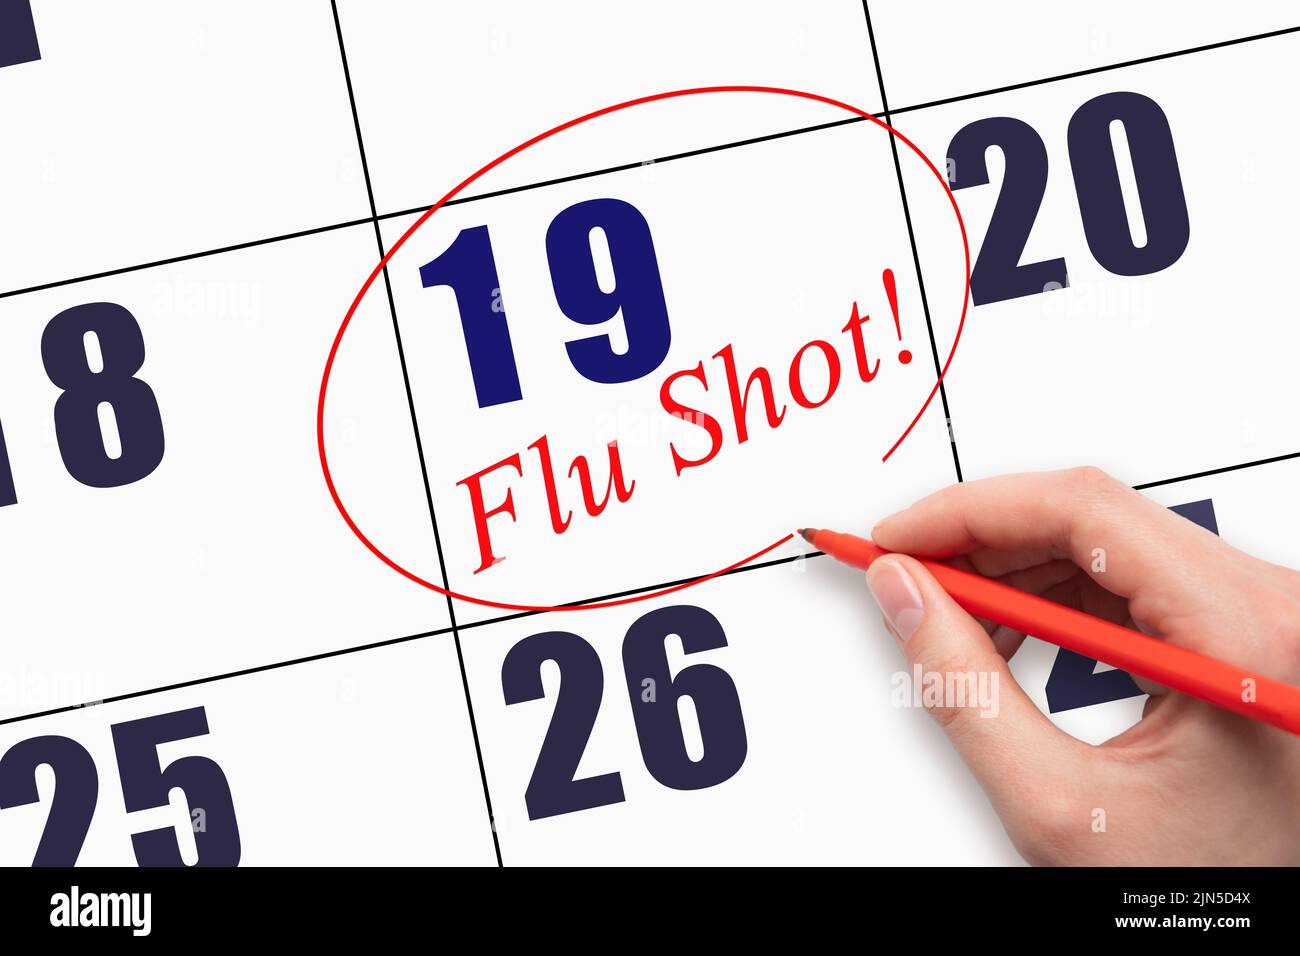 19th day of the month.  Hand writing text FLU SHOT and circling the calendar date. Mark the date on the day planner to have a flu shot. Healthcare Med Stock Photo